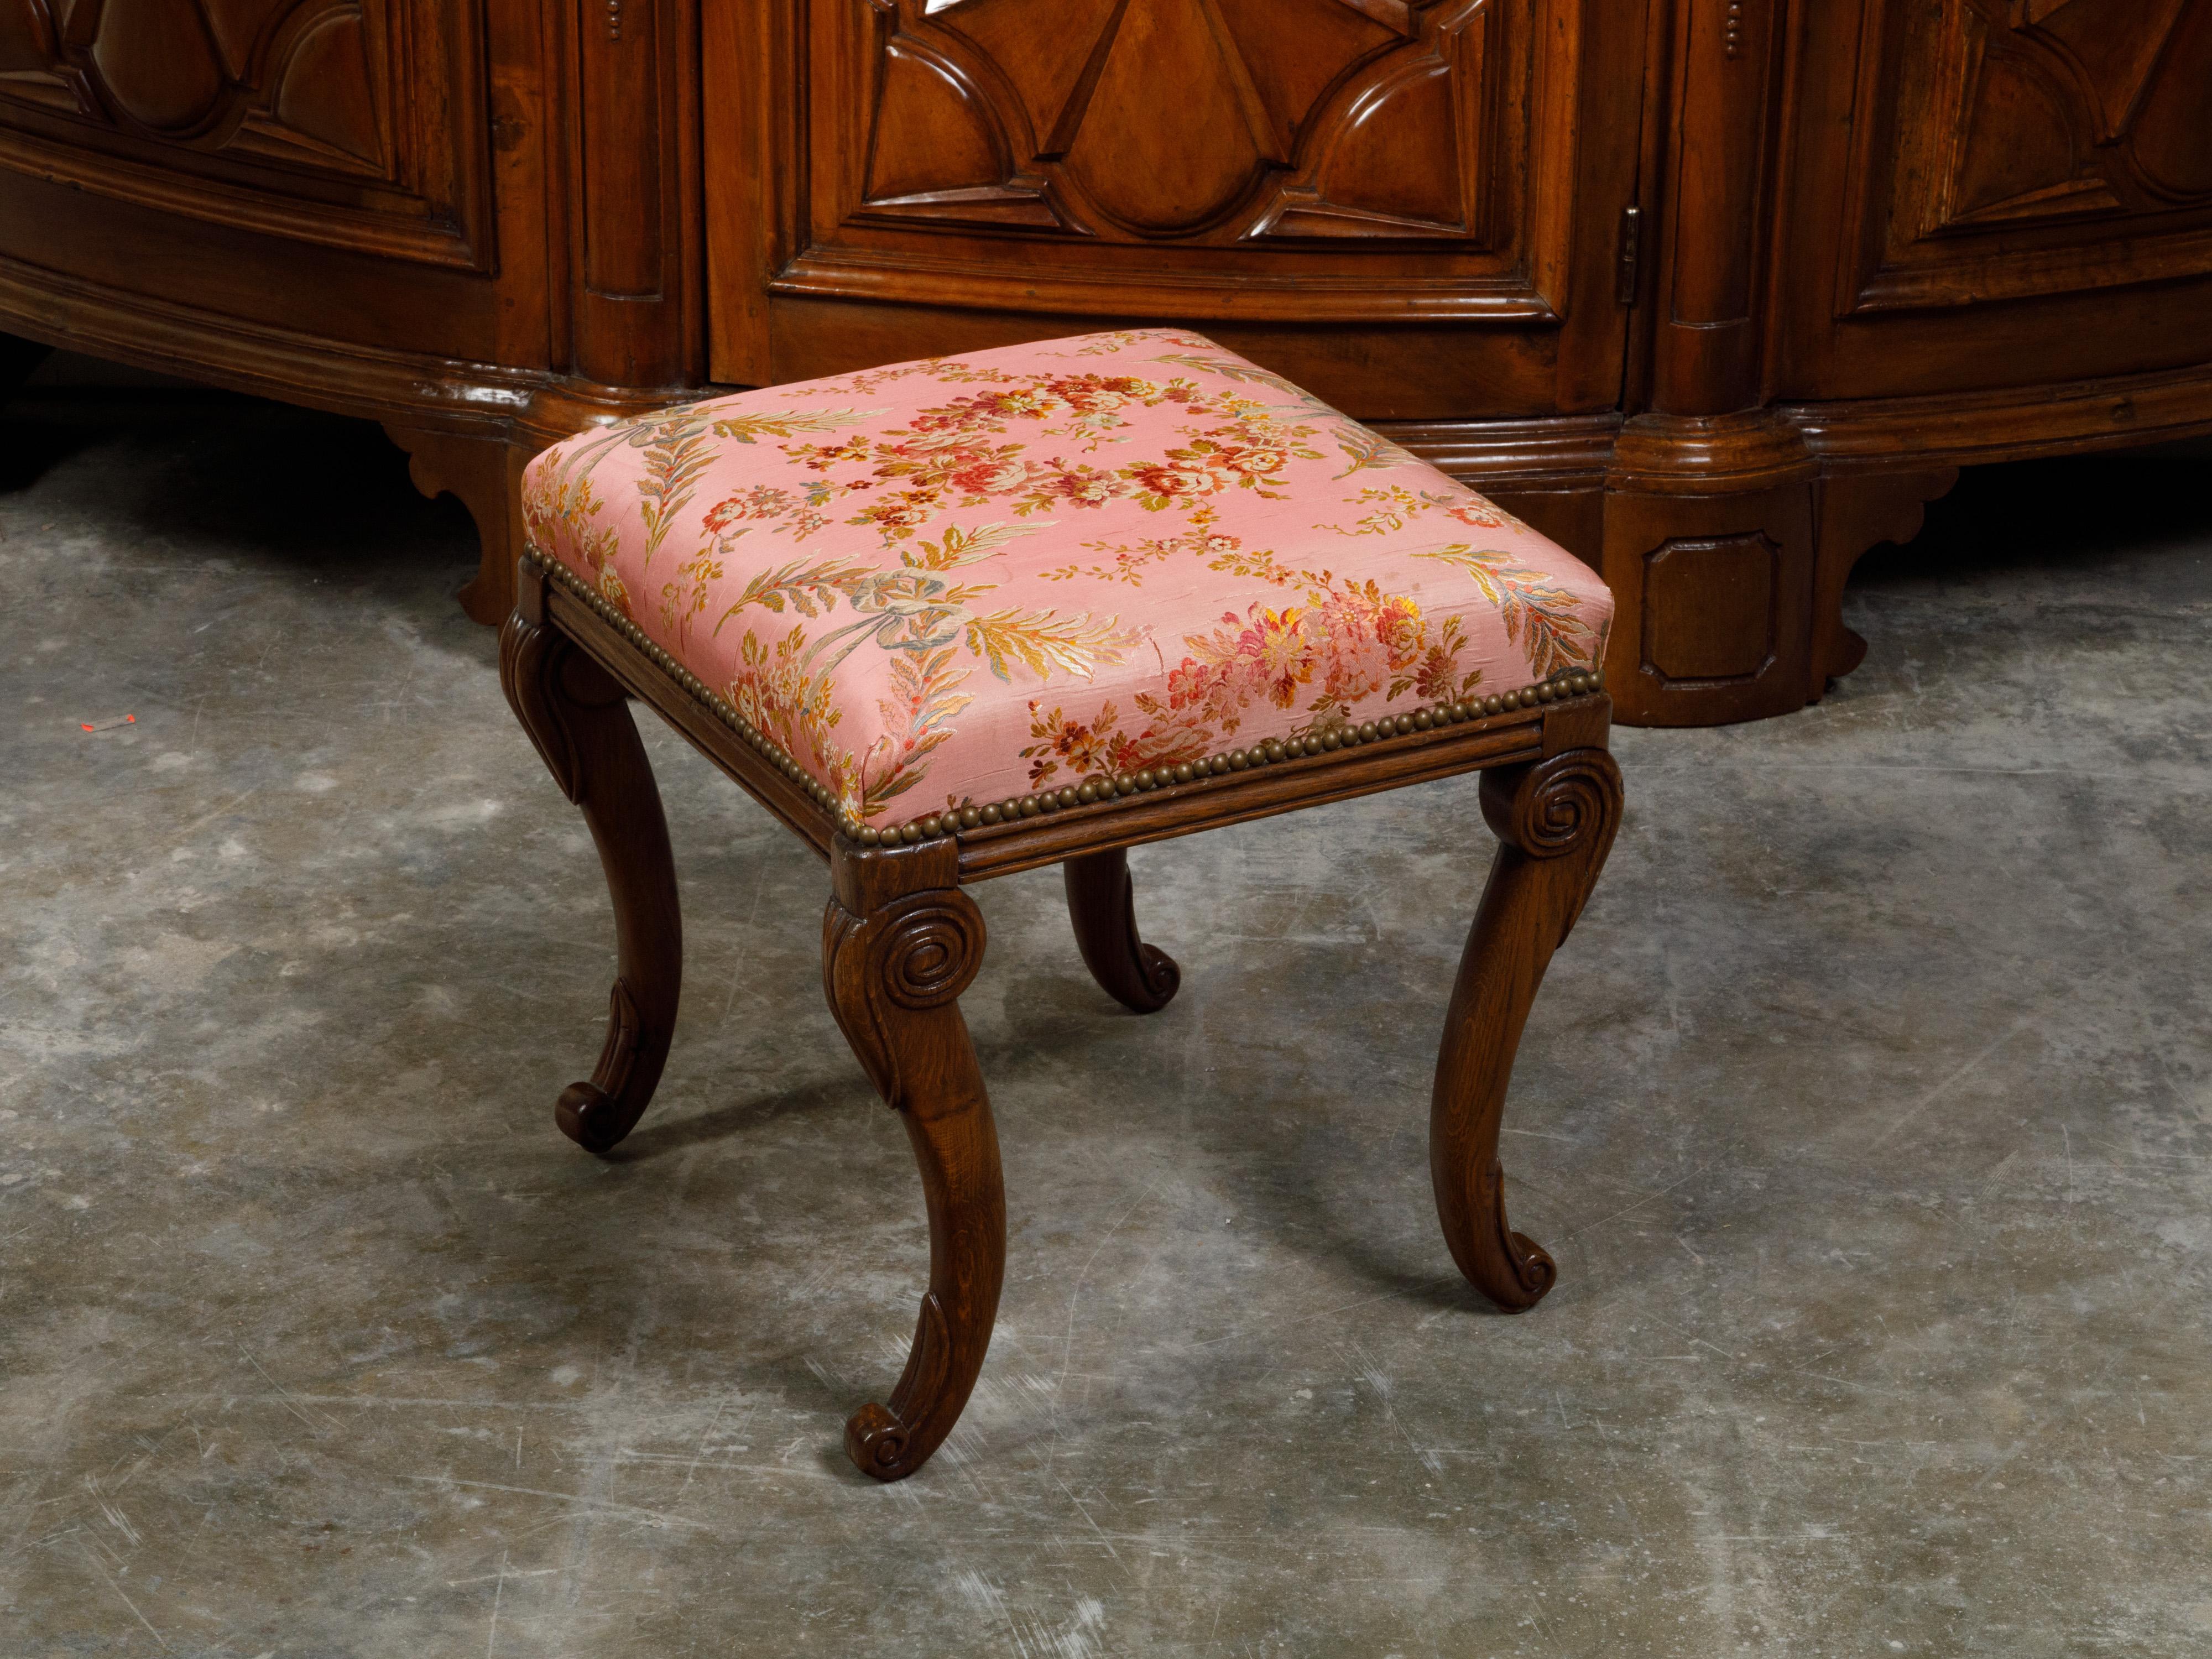 English 1820s Mahogany Stool with Floral Themed Upholstery and Cabriole Legs For Sale 1